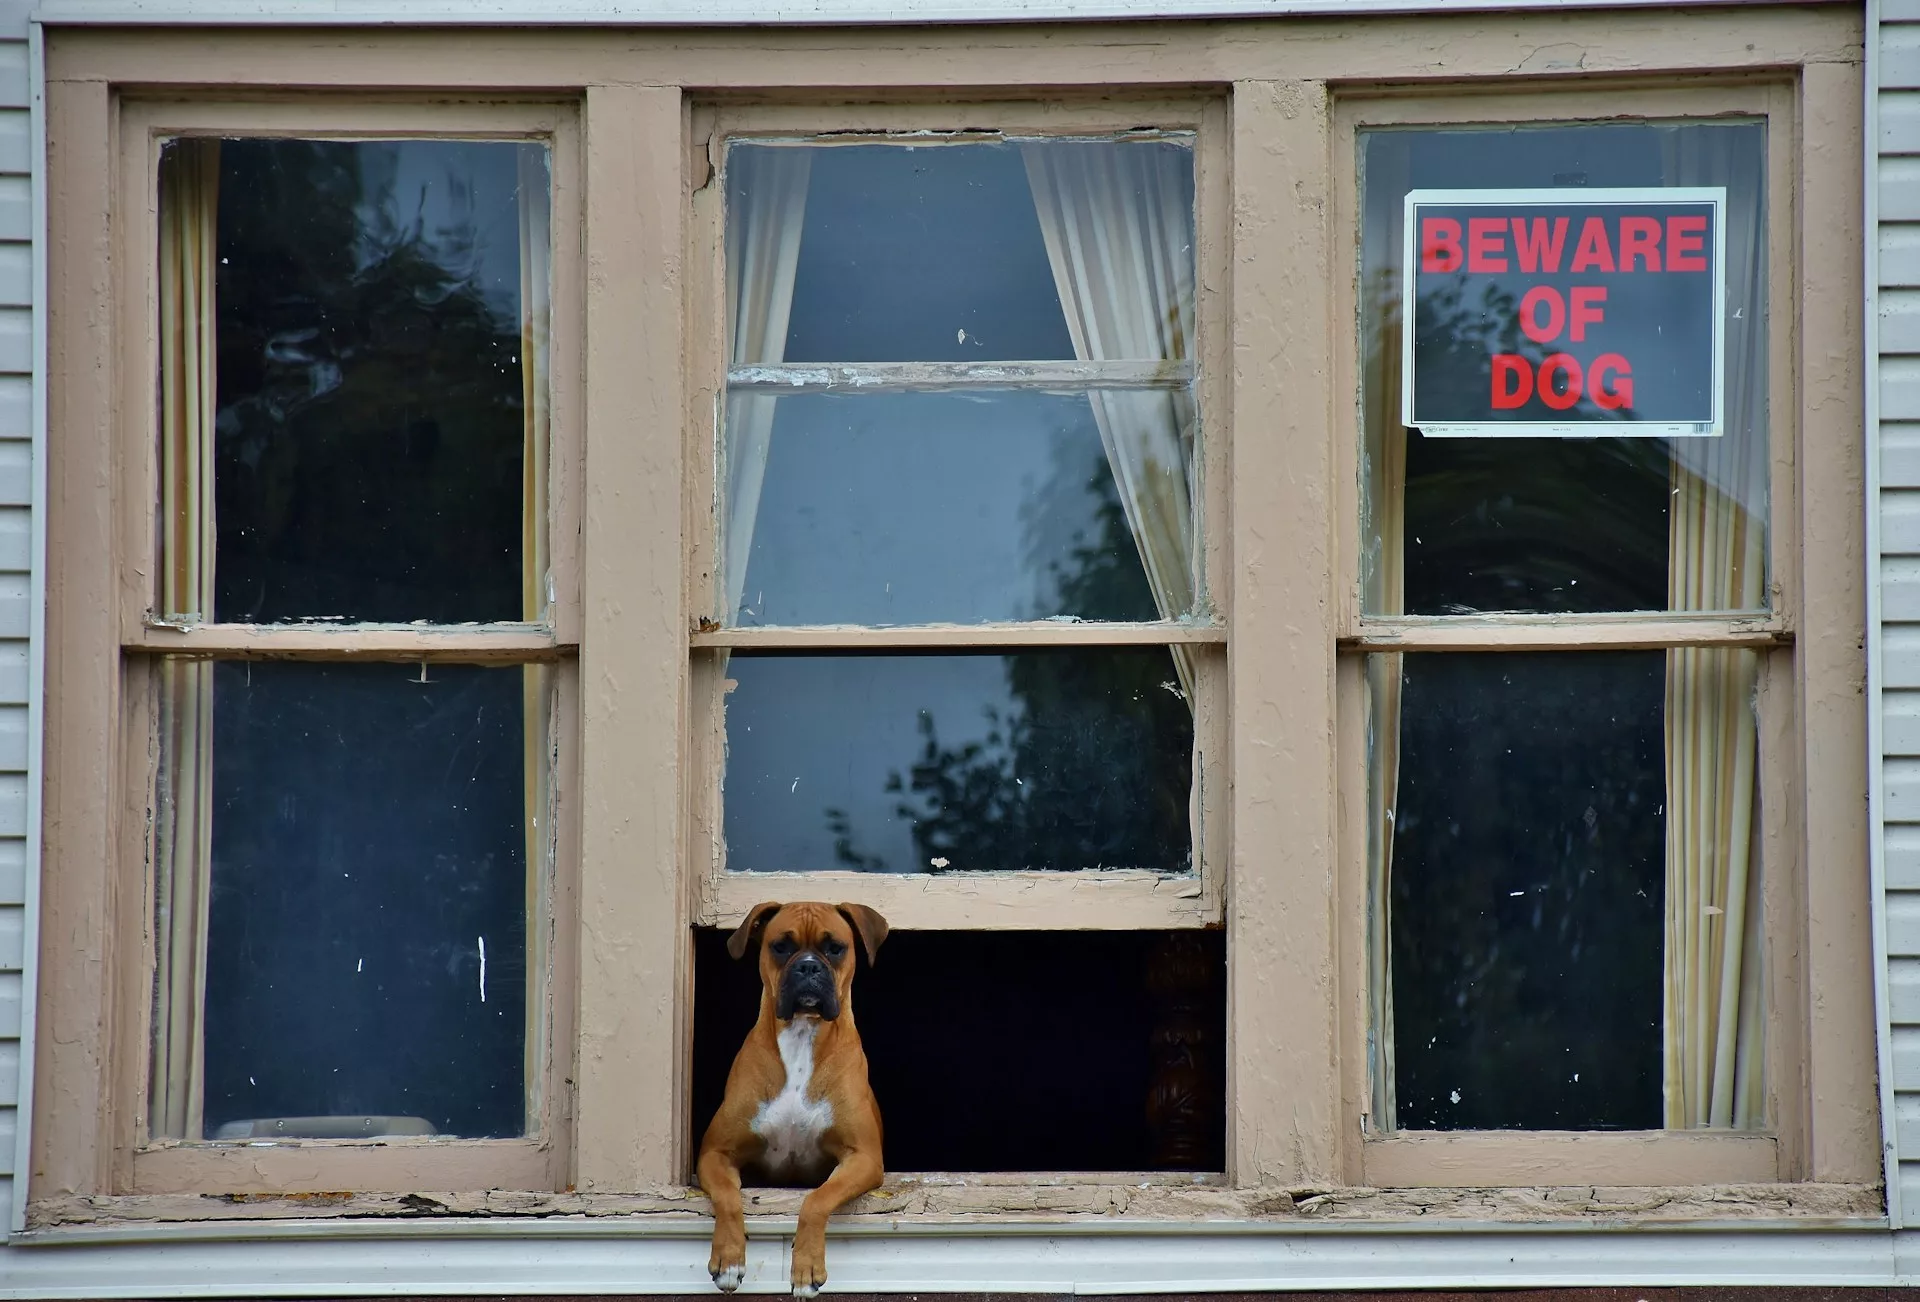 A dog sticking its head out of a window with a sign reading "Beware of dog" above its head